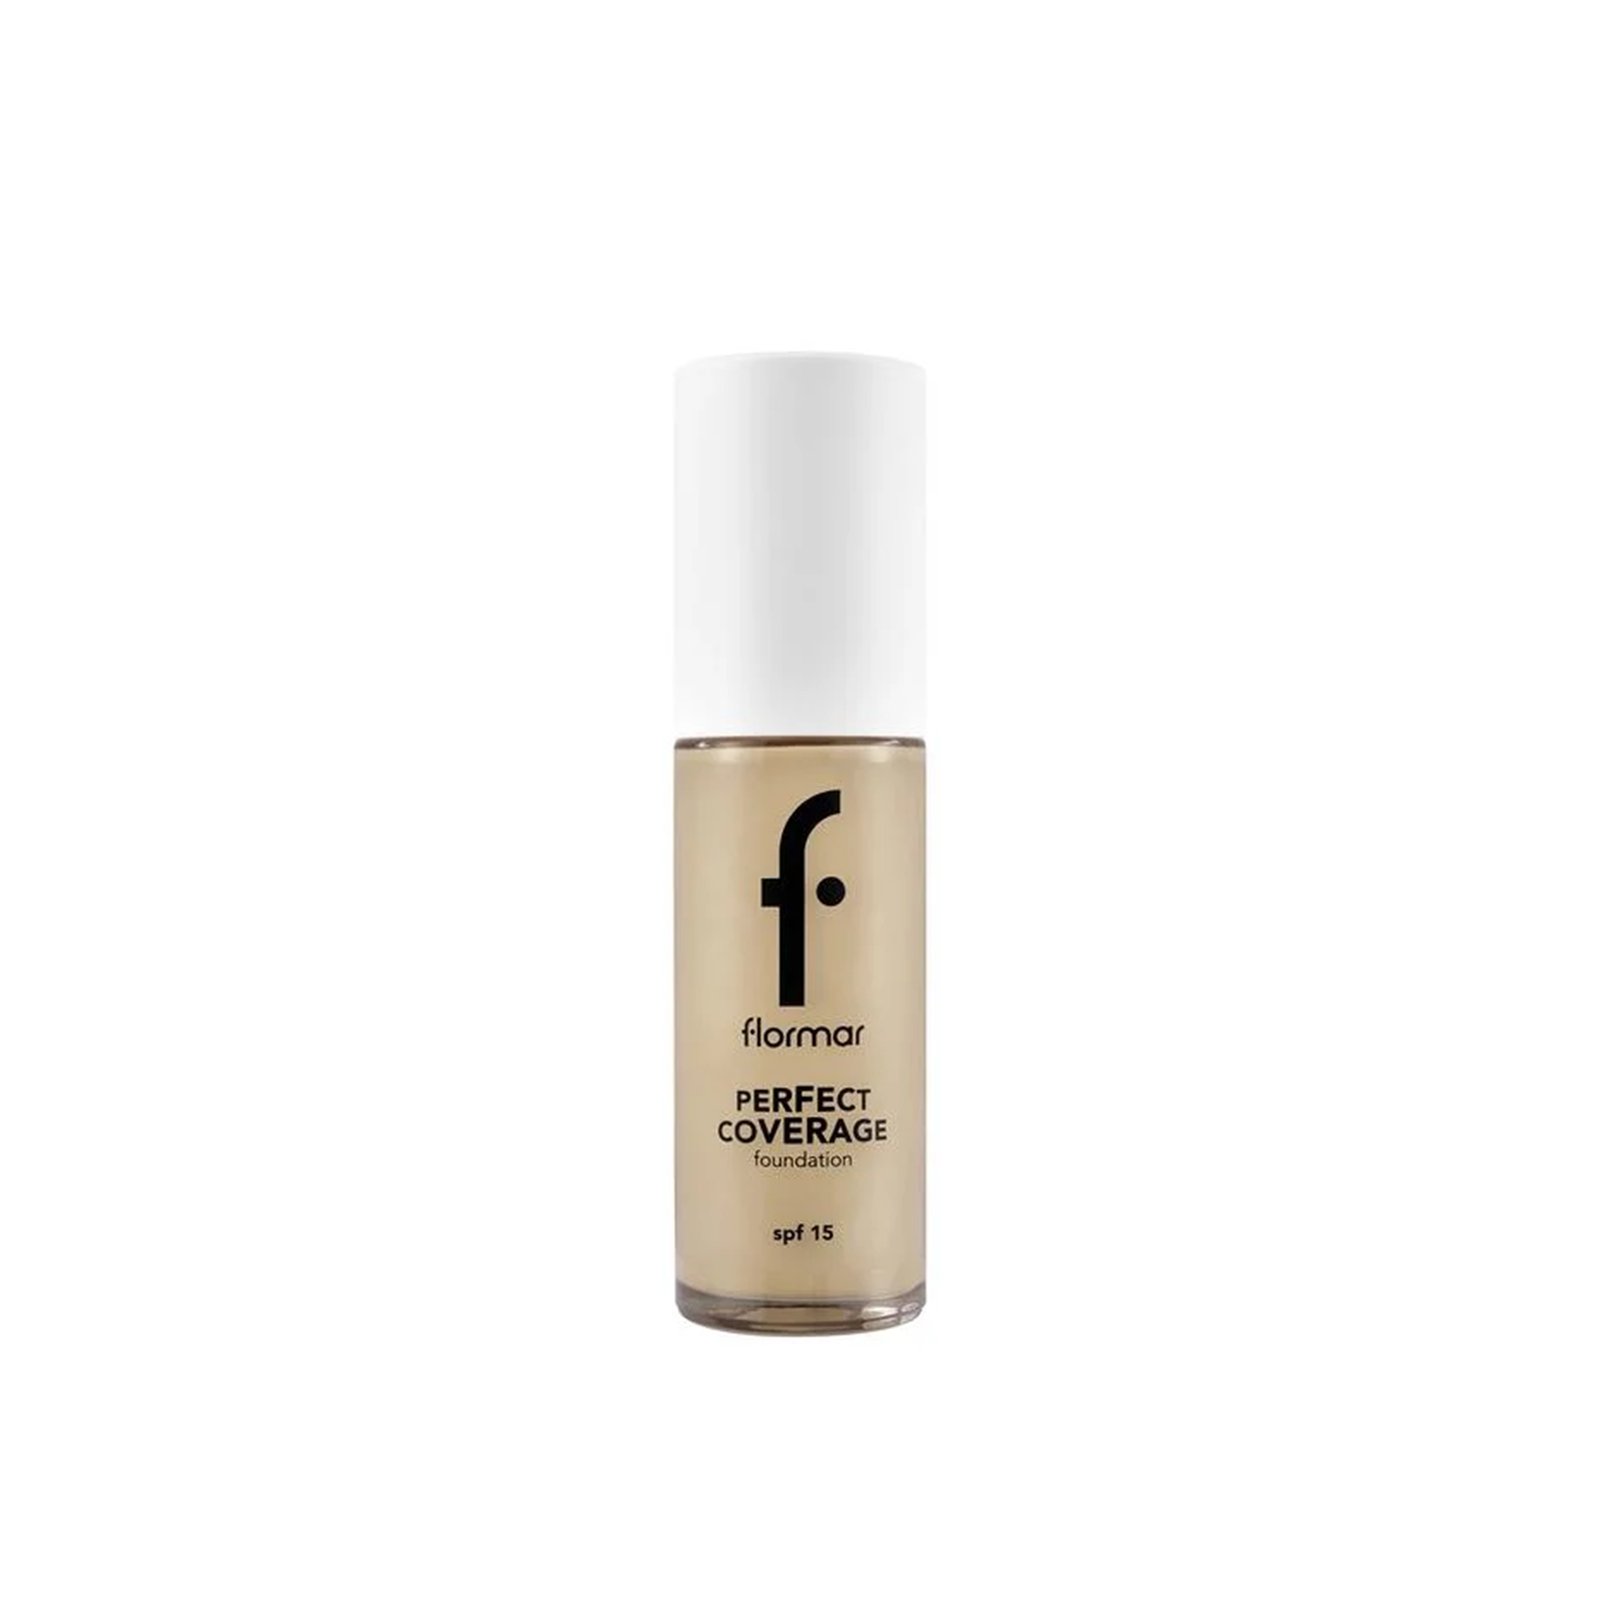 https://static.beautytocare.com/cdn-cgi/image/width=1600,height=1600,f=auto/media/catalog/product//f/l/flormar-perfect-coverage-foundation-spf15-102-soft-beige-30ml_1.png